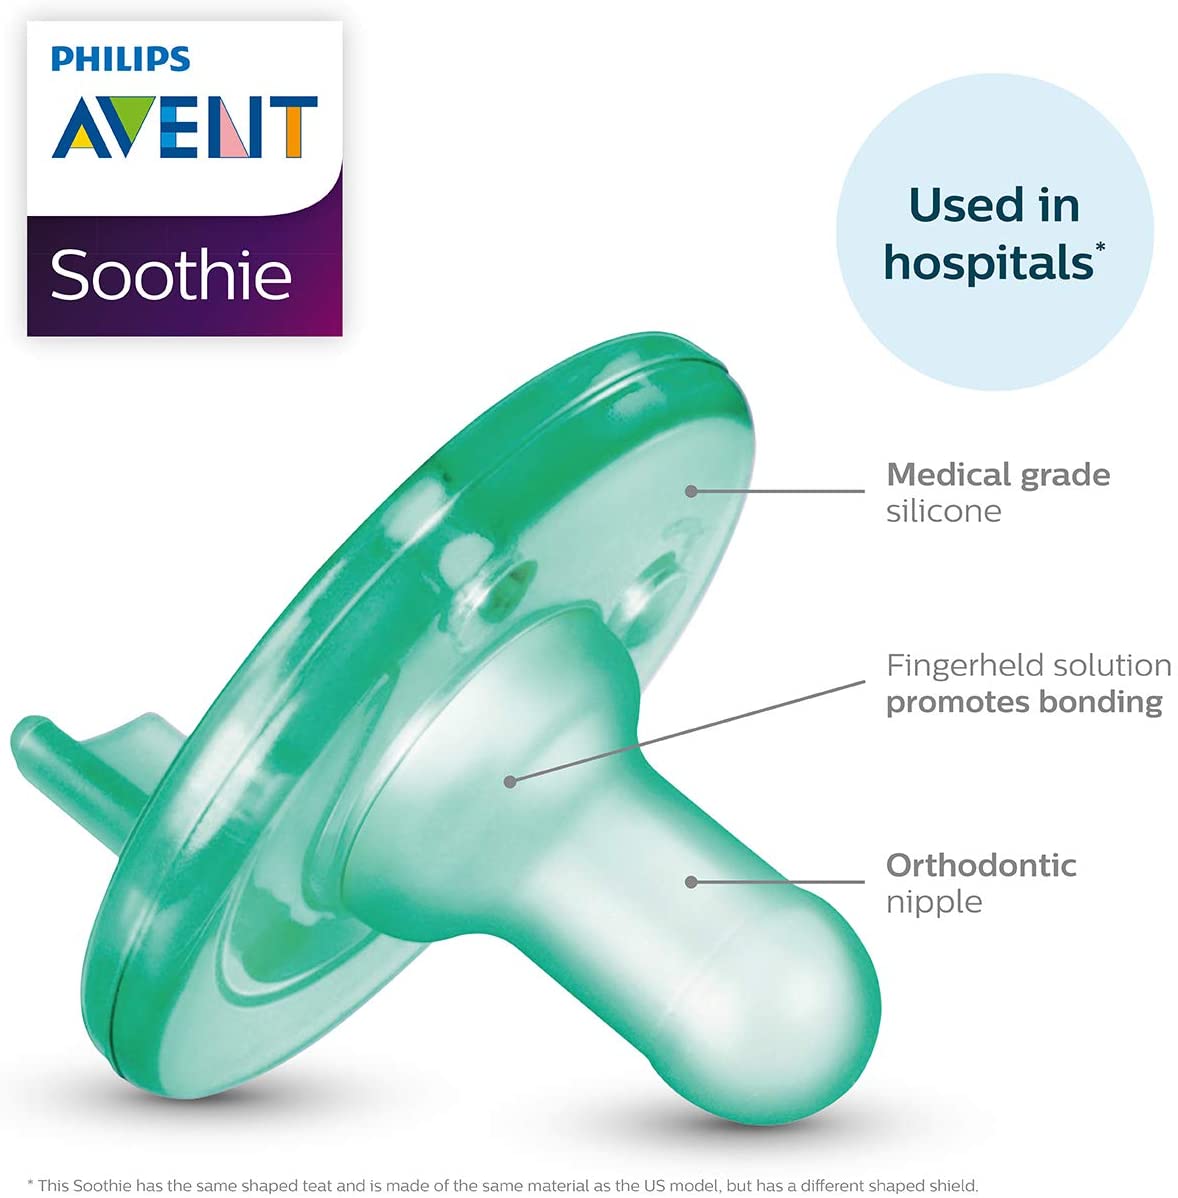 Philips AVENT Chupeta Soothie